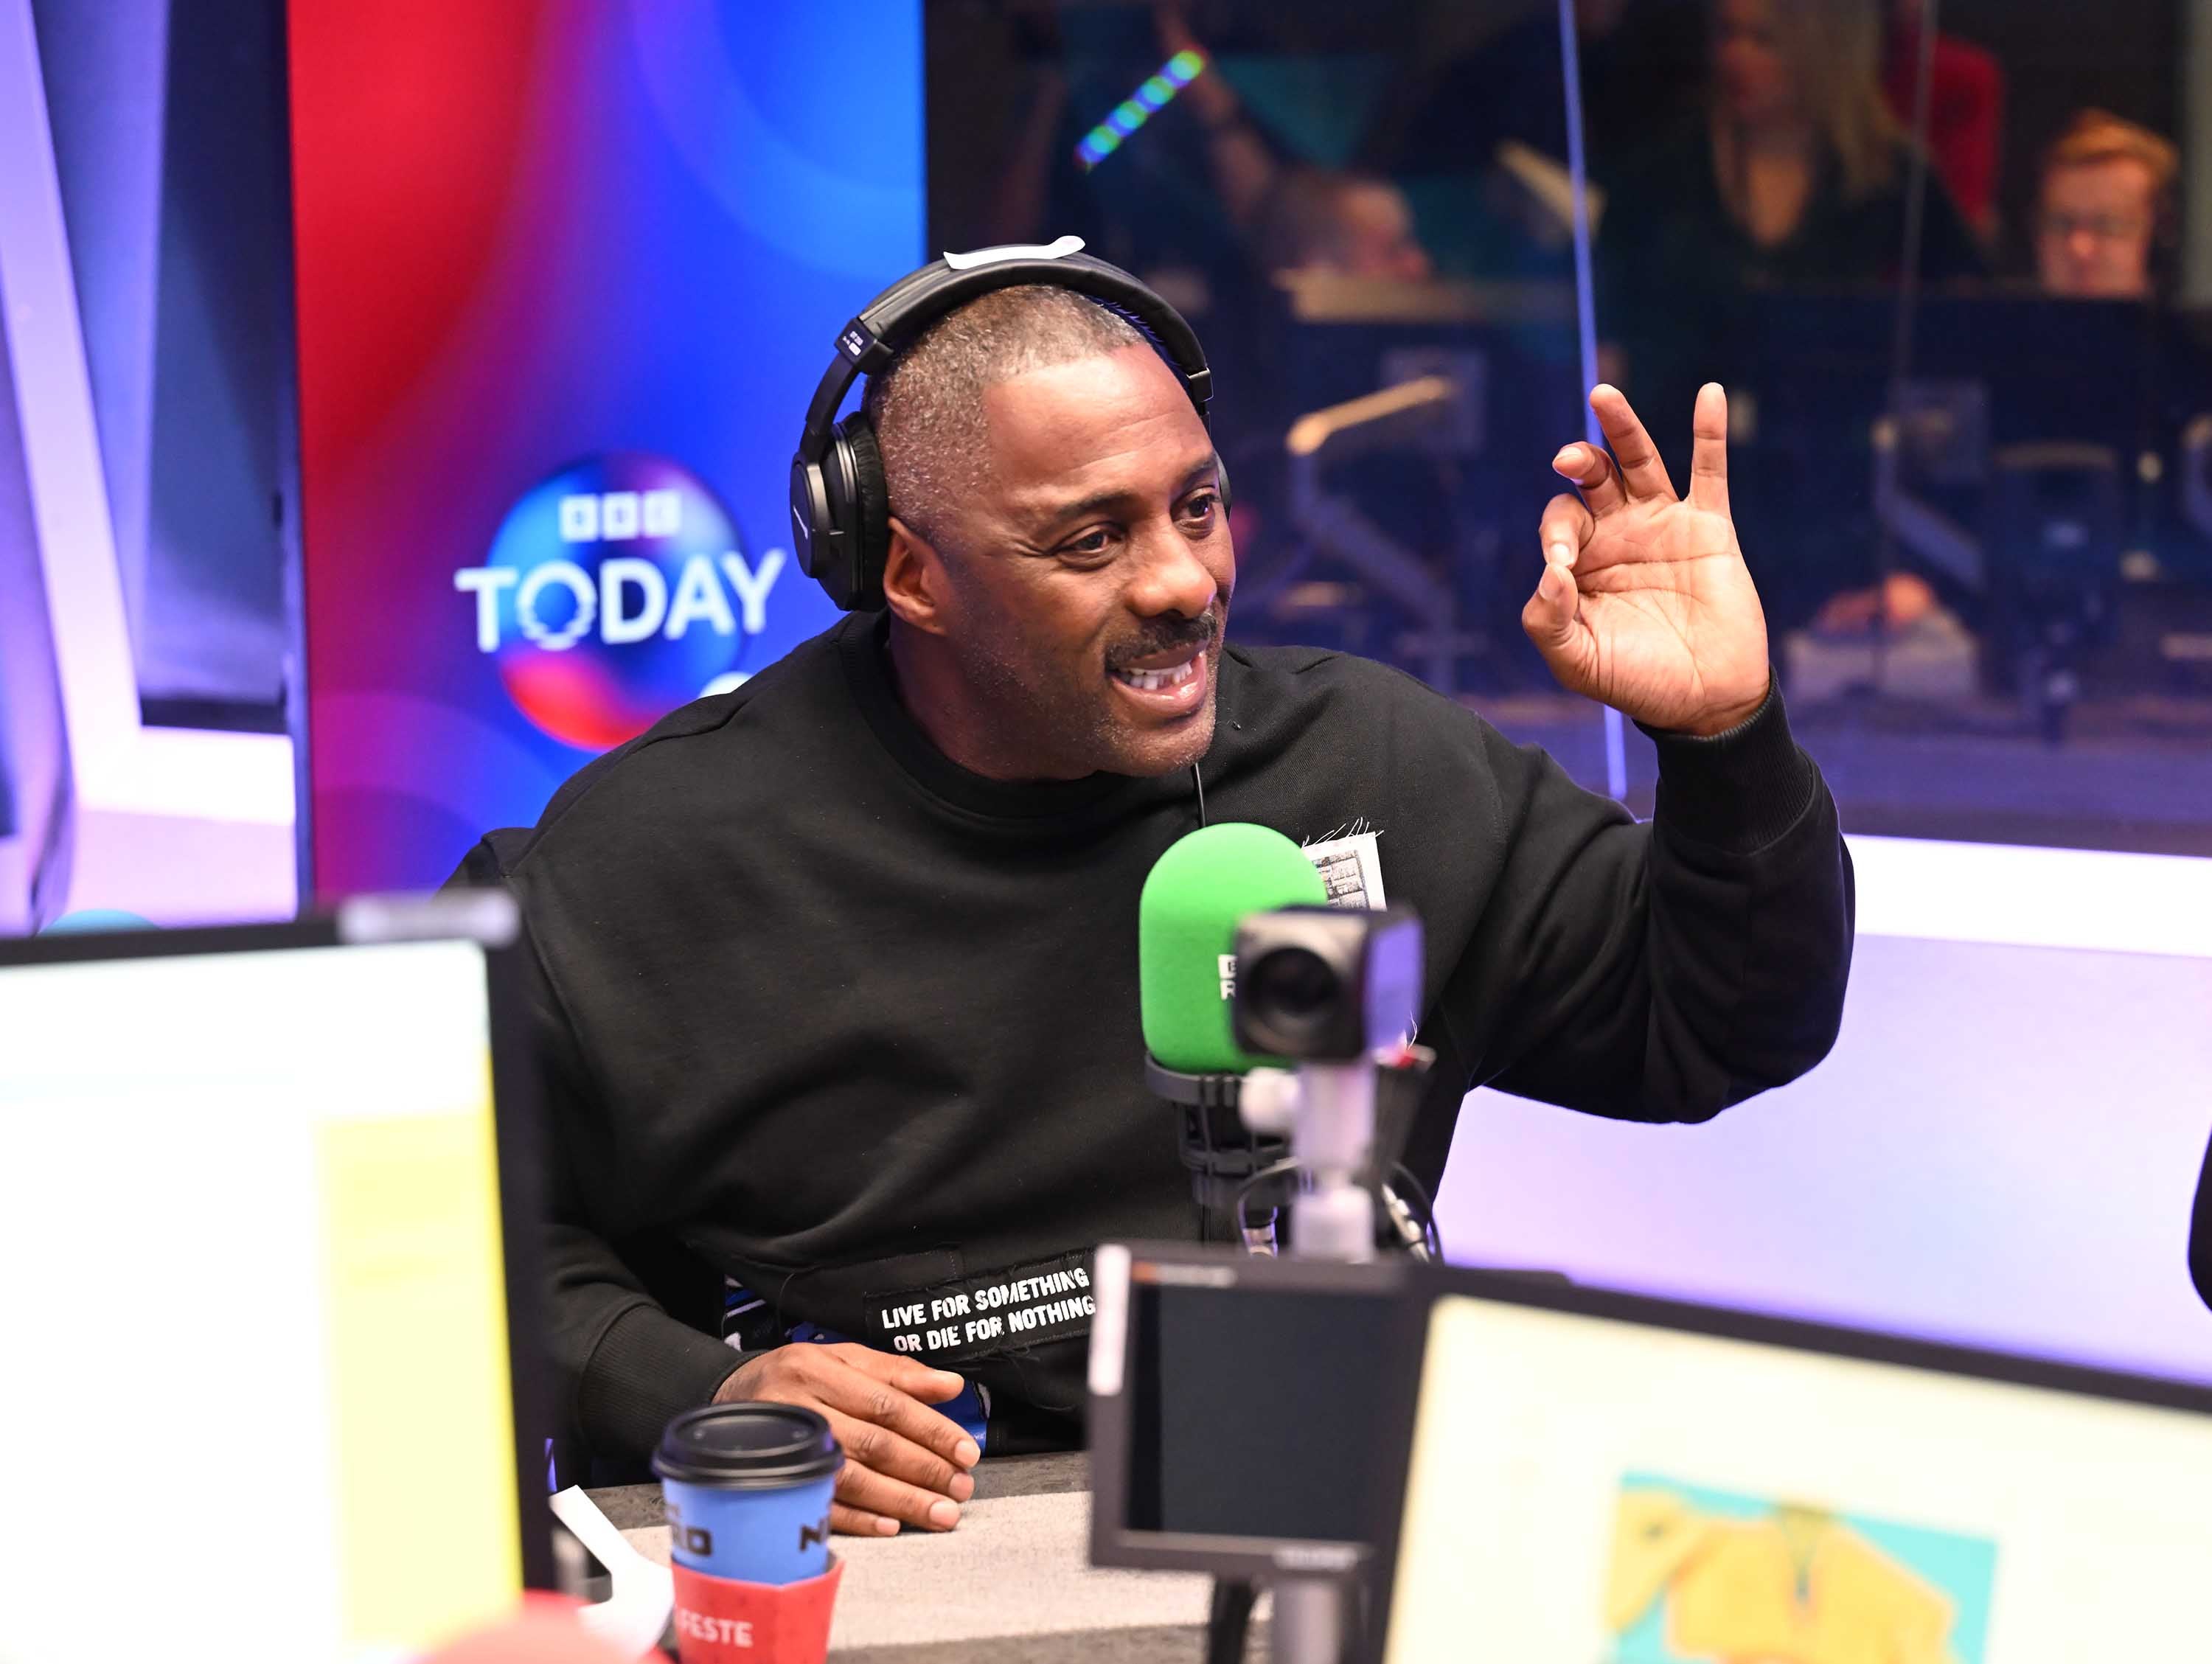 Idris Elba spoke on BBC Radio 4’s ‘Today’ programme ahead of the launch of his Don’t Stop Your Future campaign in Parliament Square